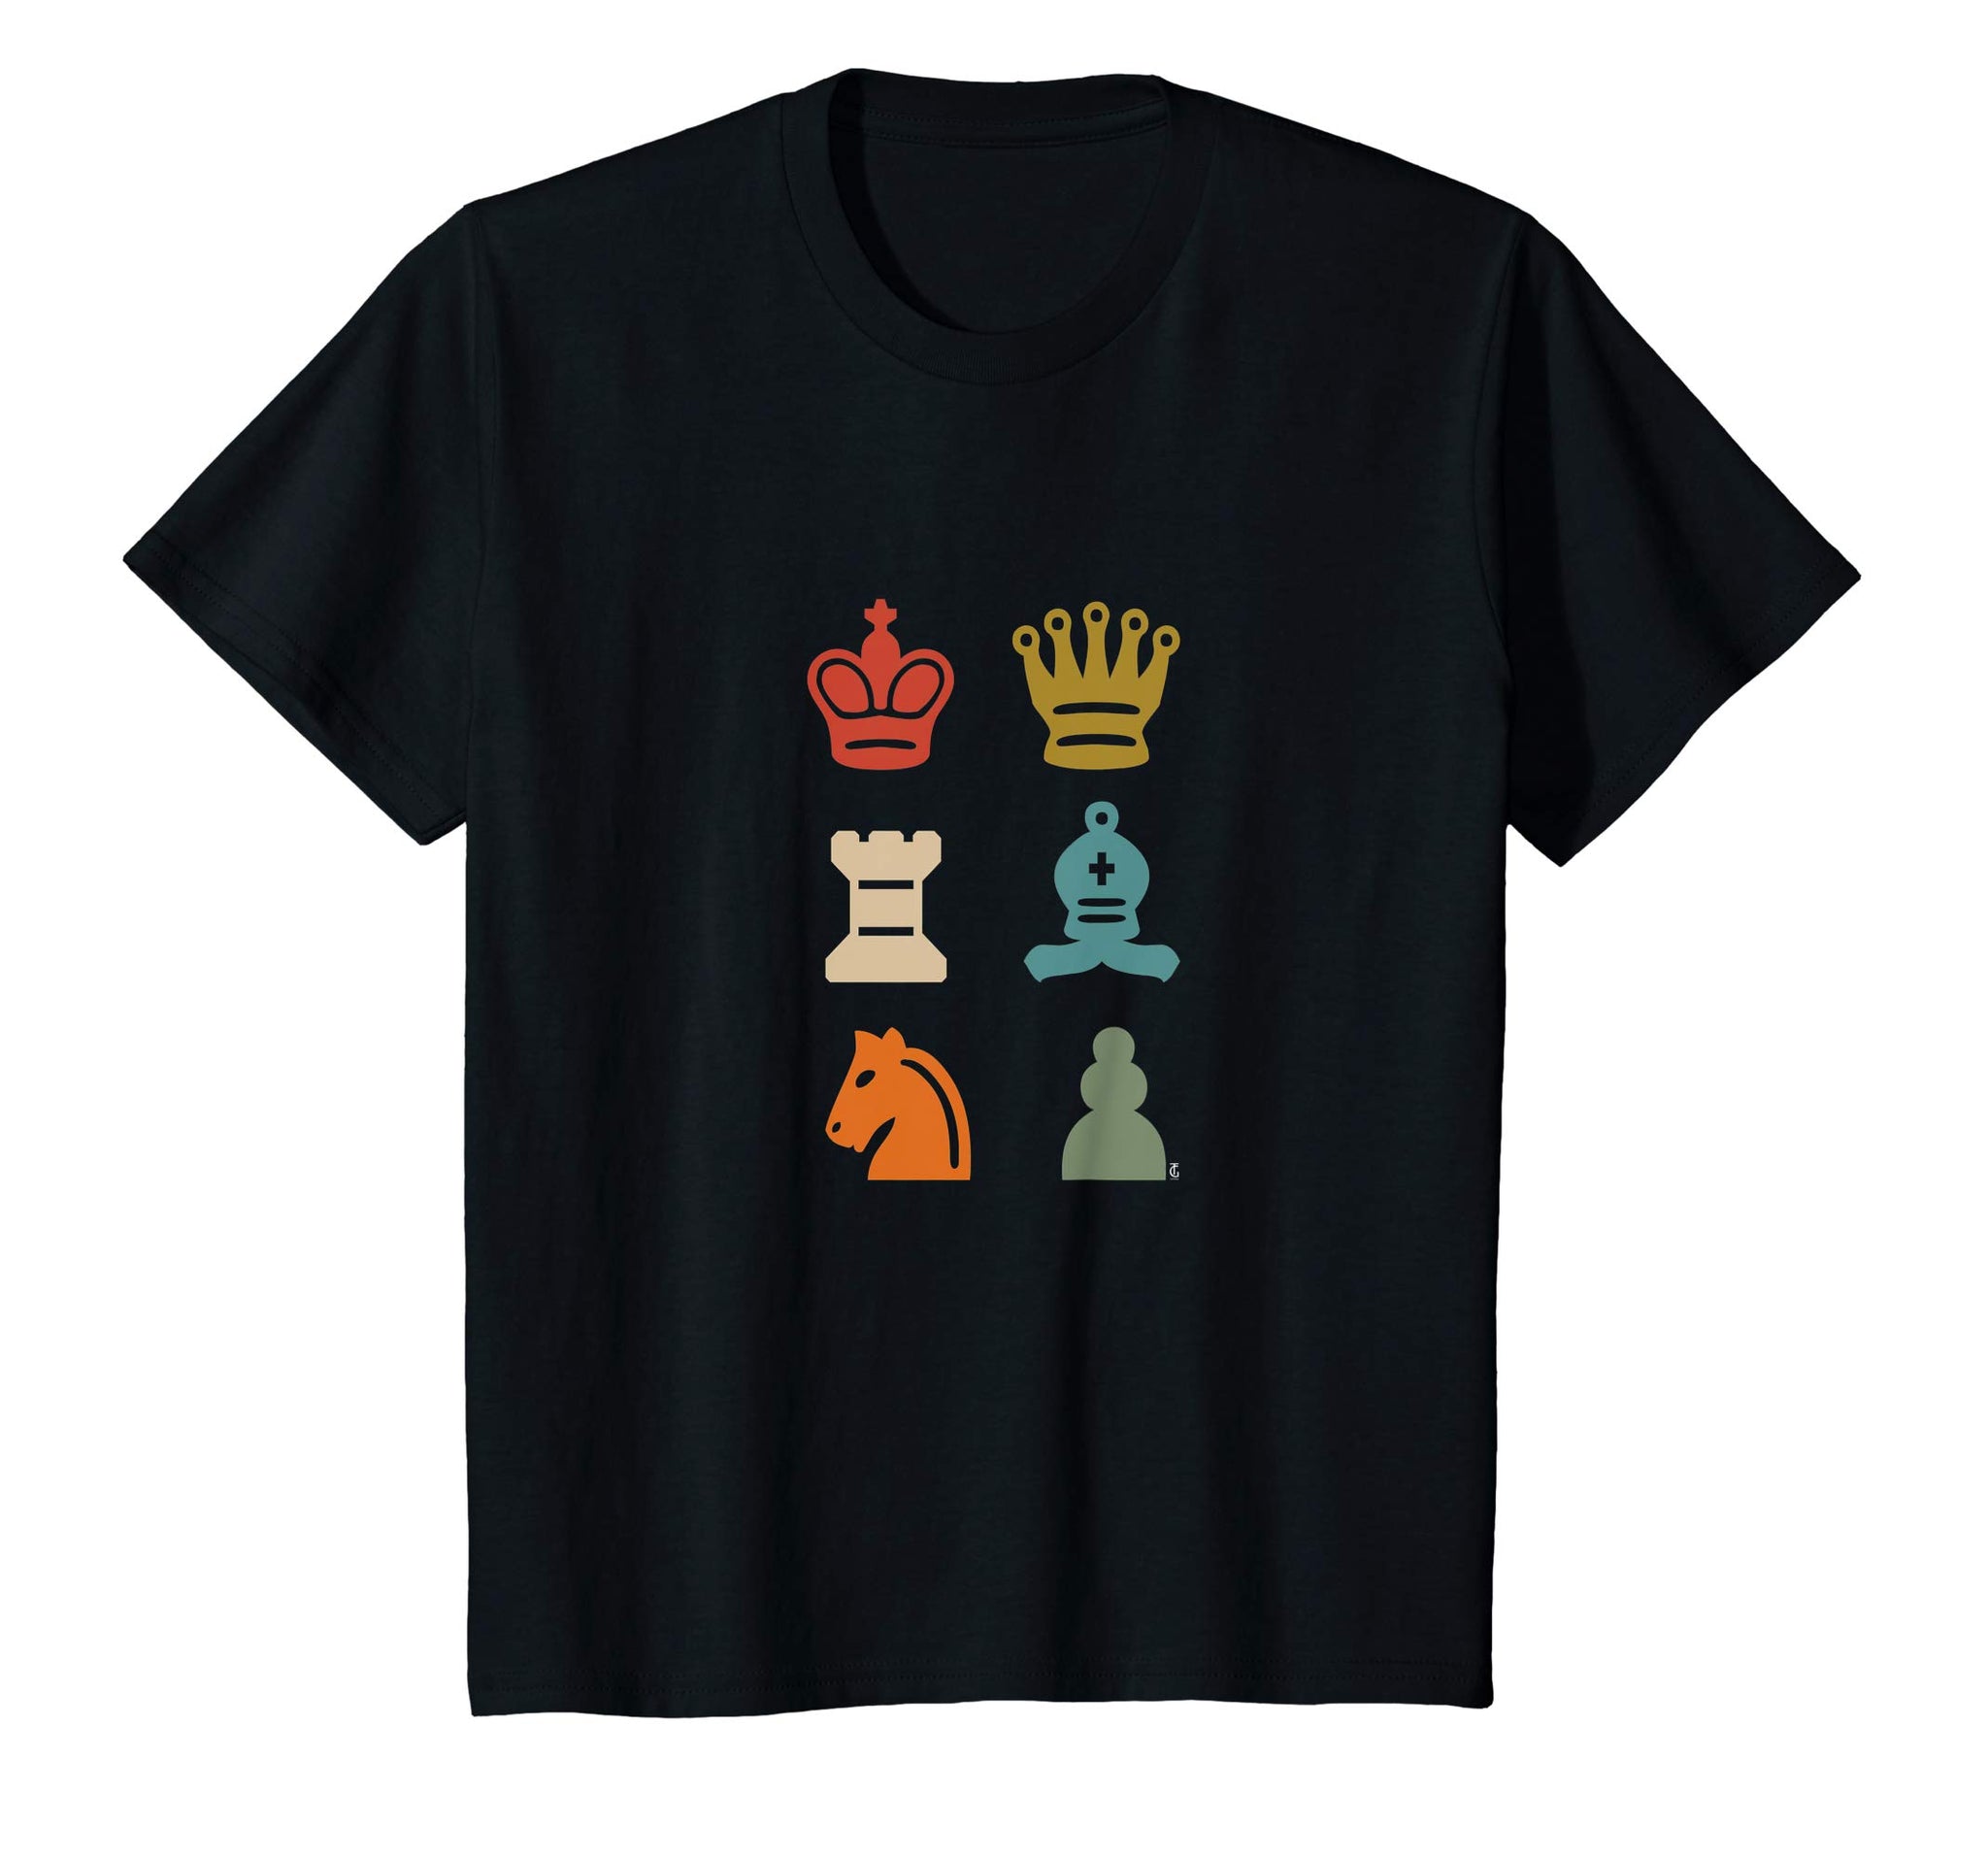 Retro Chess Pieces Graphic King Queen Knight Rook T Shirt Chic Funny